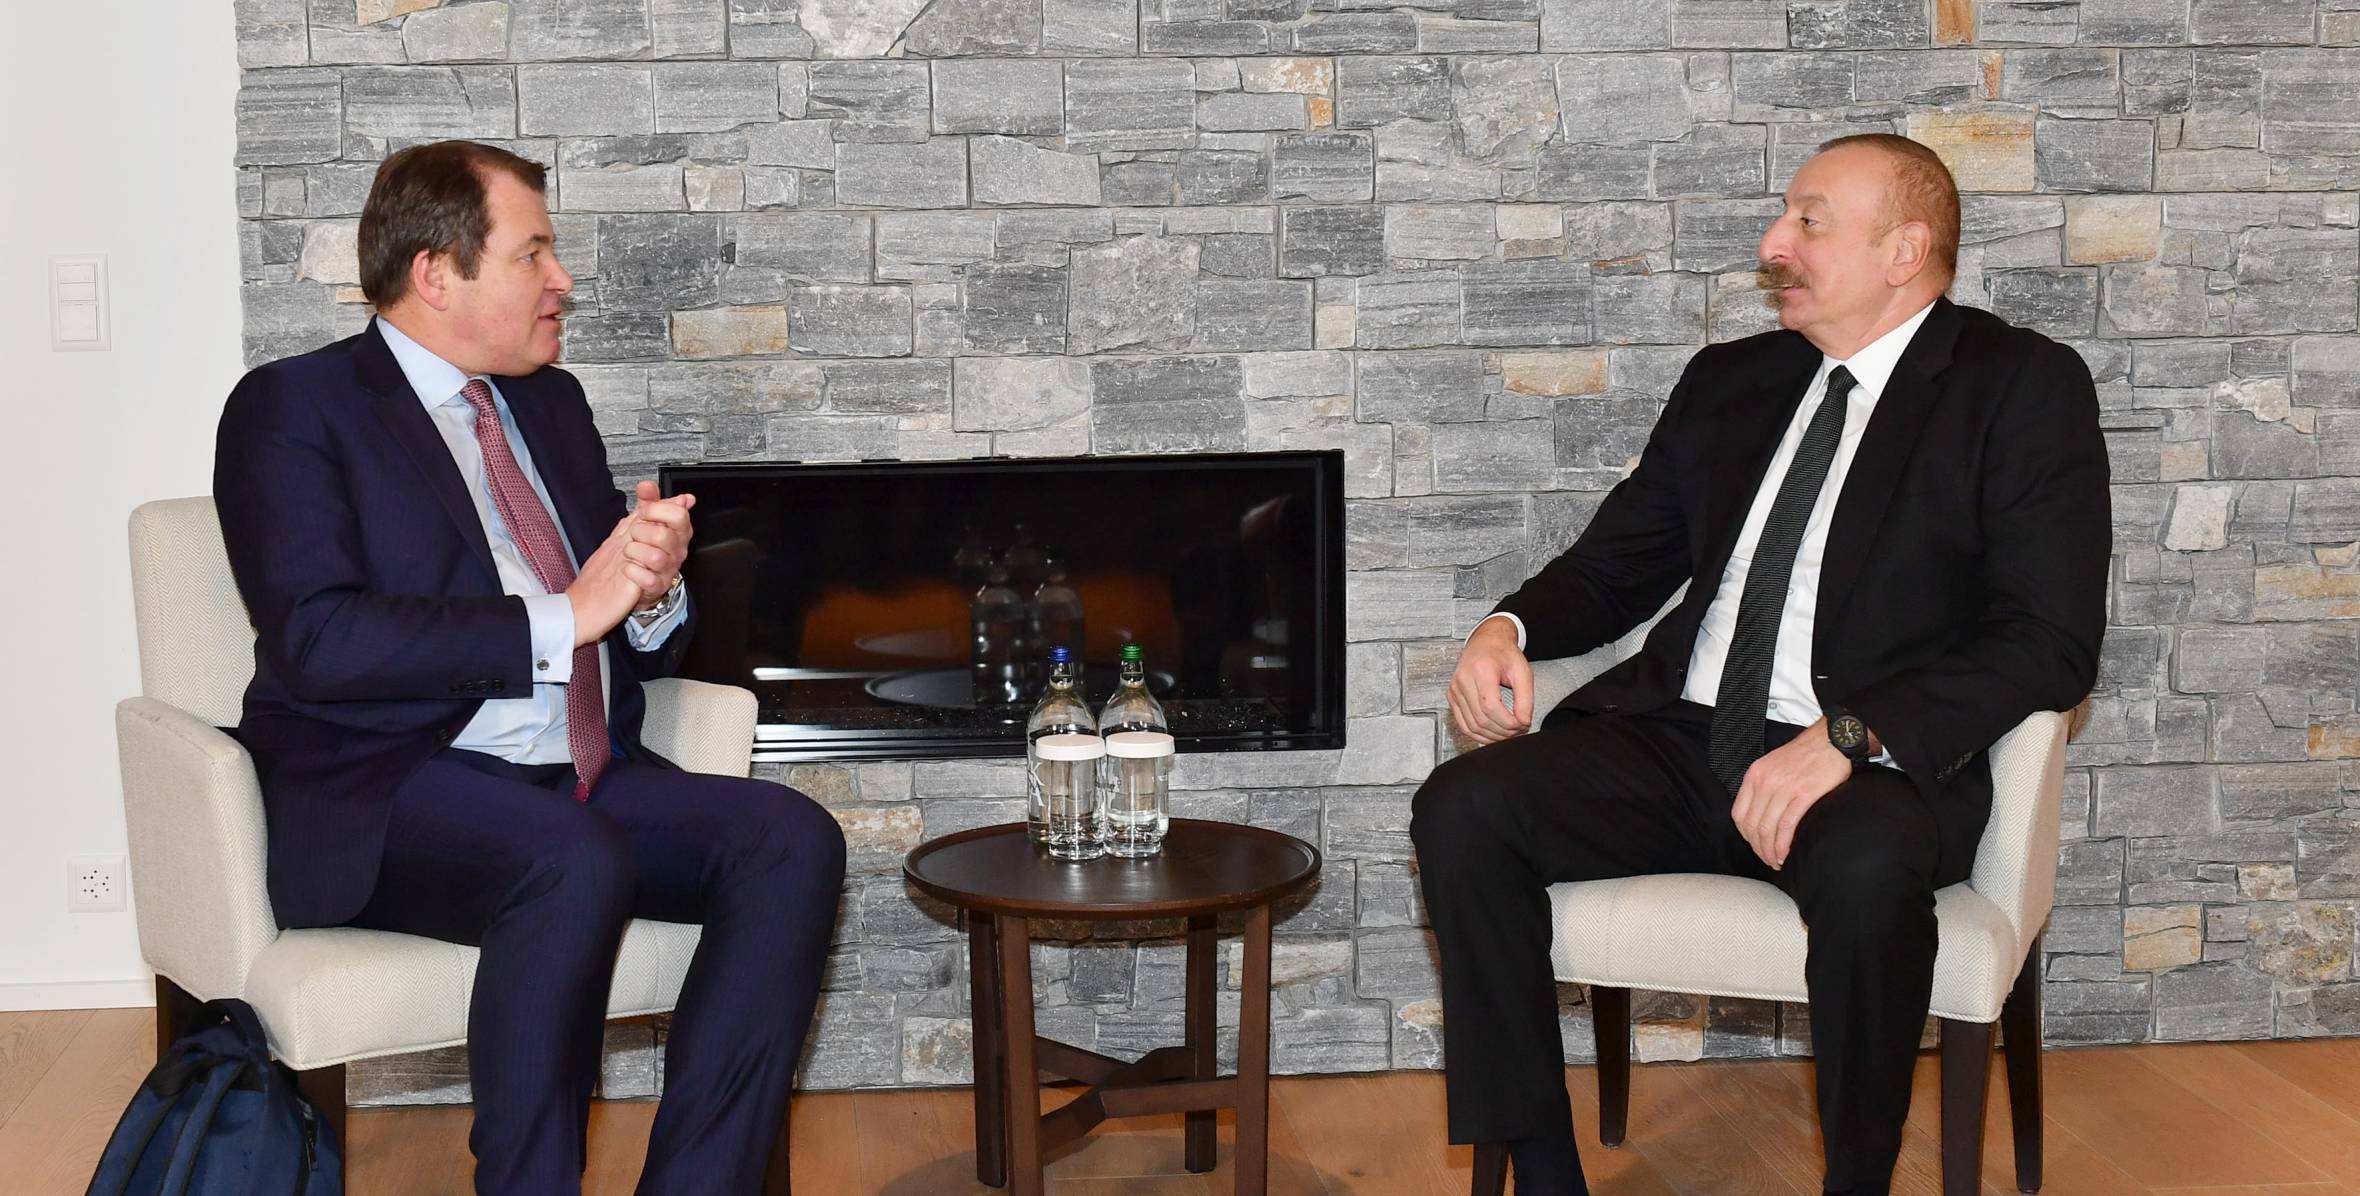 Ilham Aliyev met with First Vice President of European Bank for Reconstruction and Development in Davos